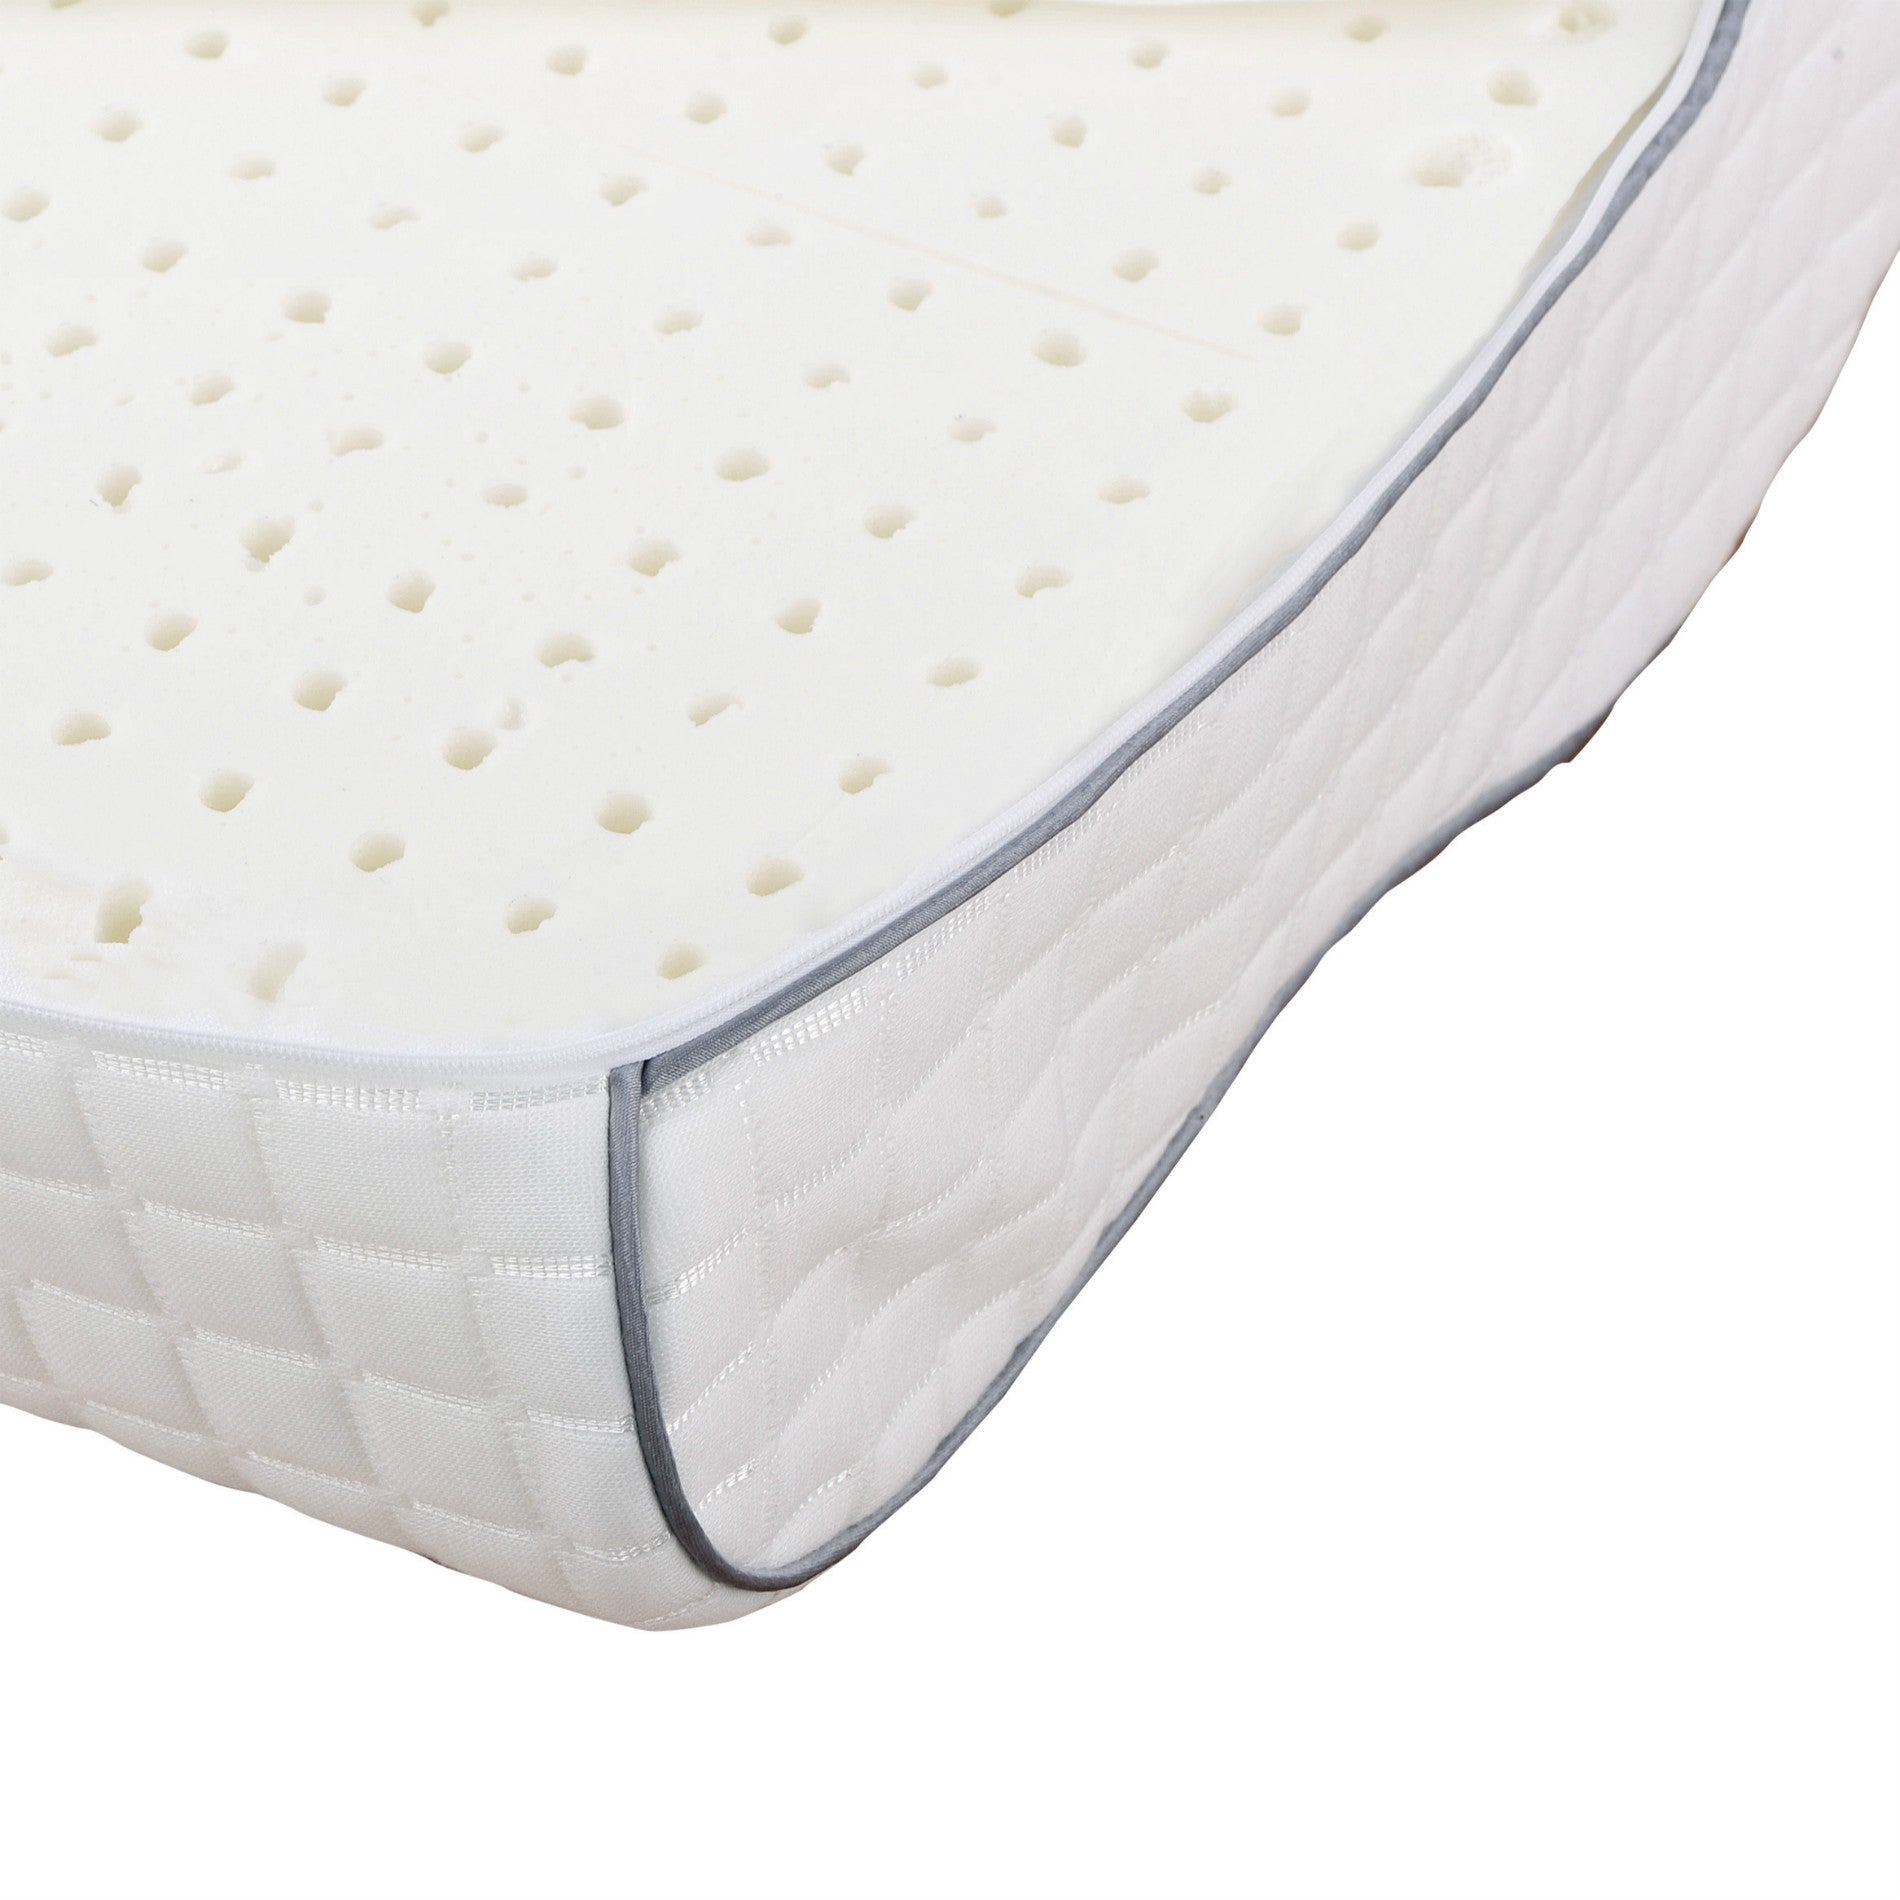 Home Soft Things Removable Contour Pillow, 14" x 21", White